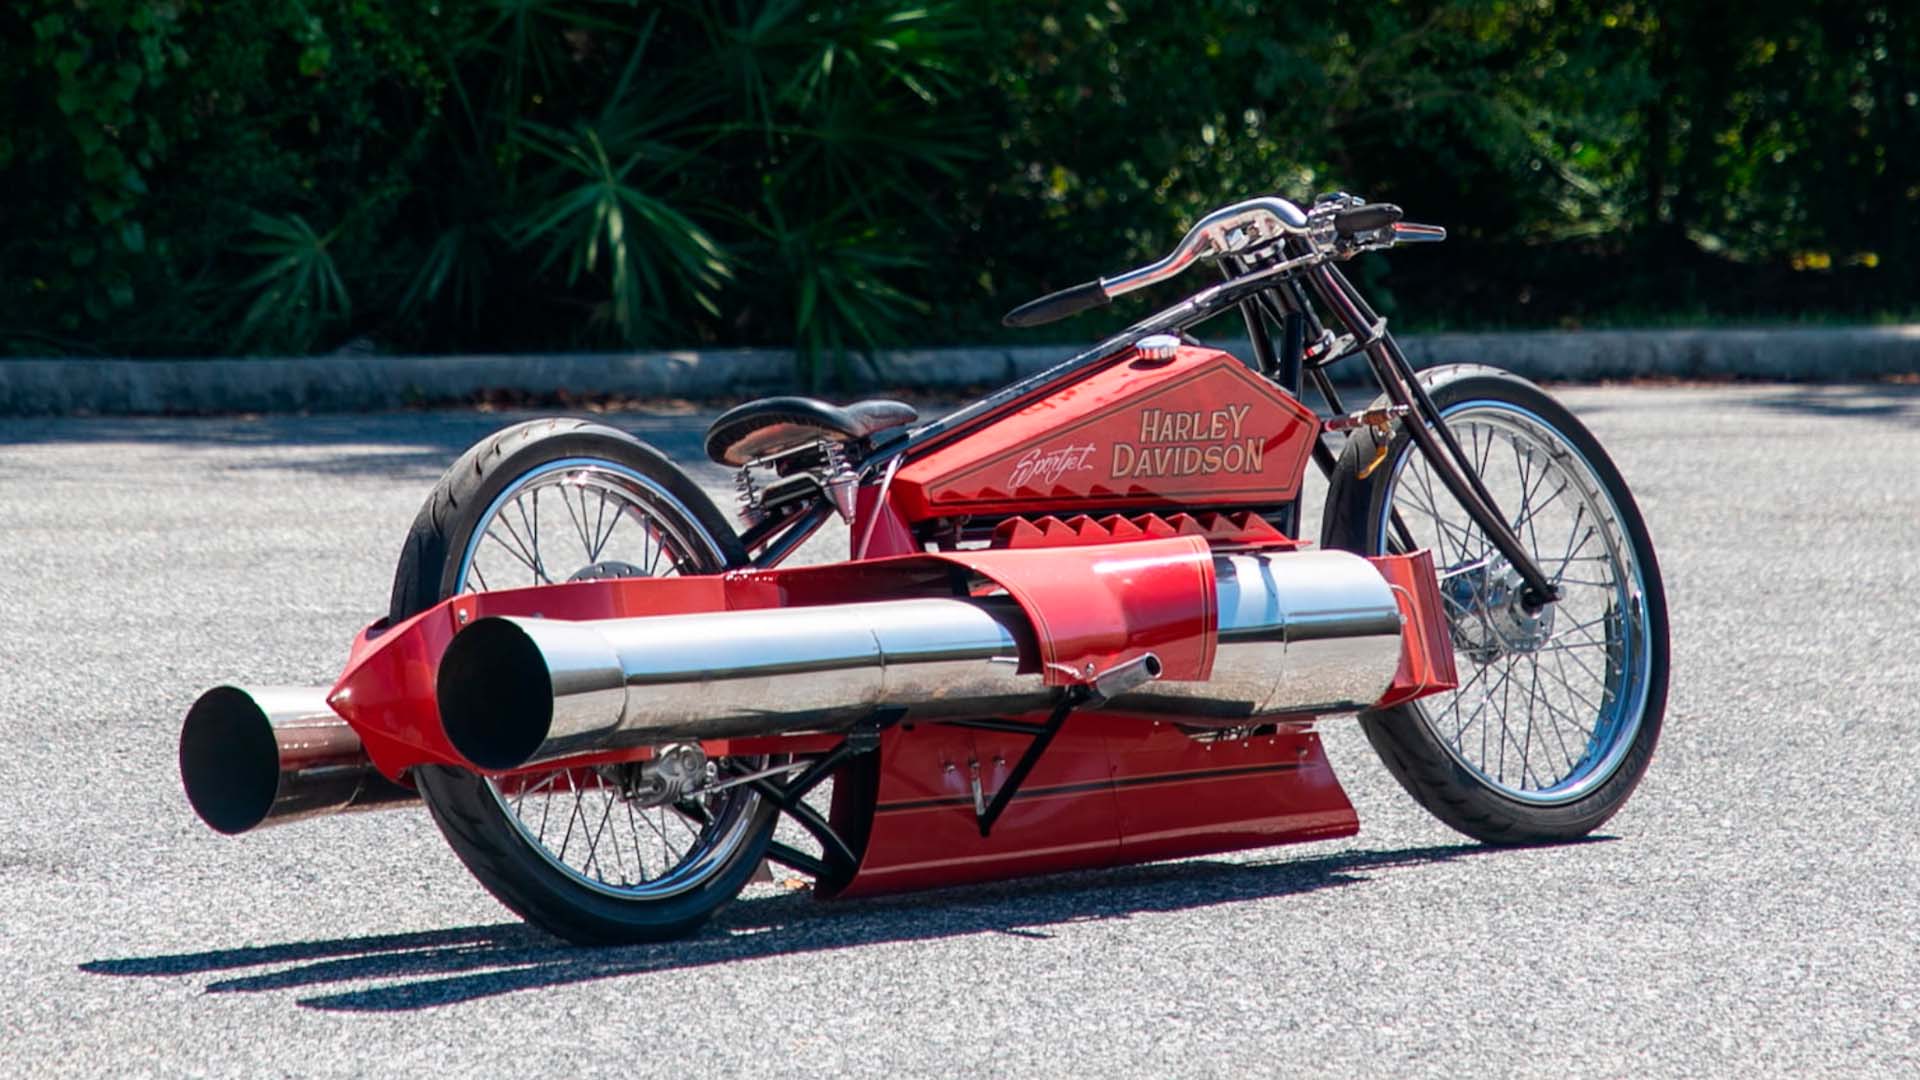 Pulsejet-Powered 1929 Harley-Davidson for Sale Has the Pipes to End All Pipes